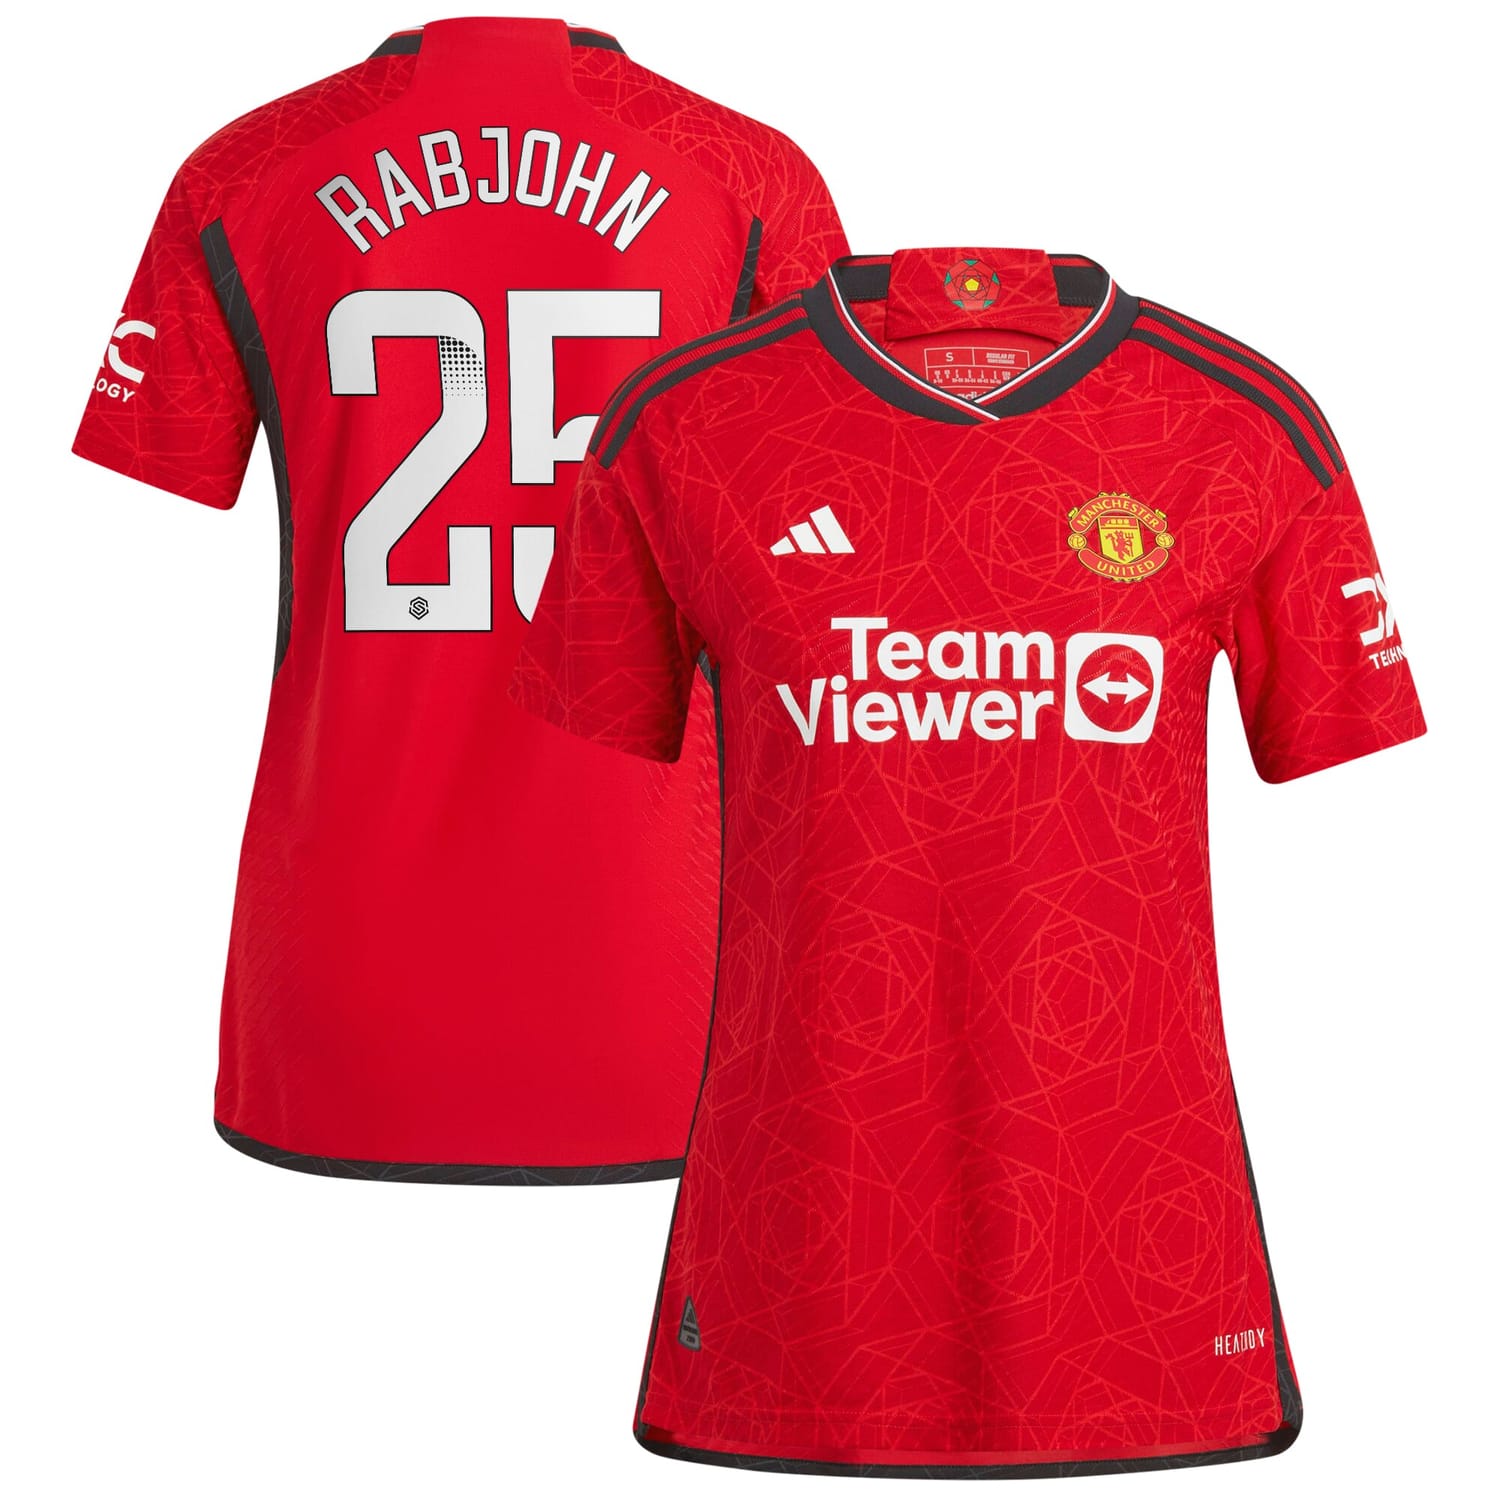 Premier League Manchester United Home WSL Authentic Jersey Shirt 2023-24 player Evie Rabjohn printing for Women